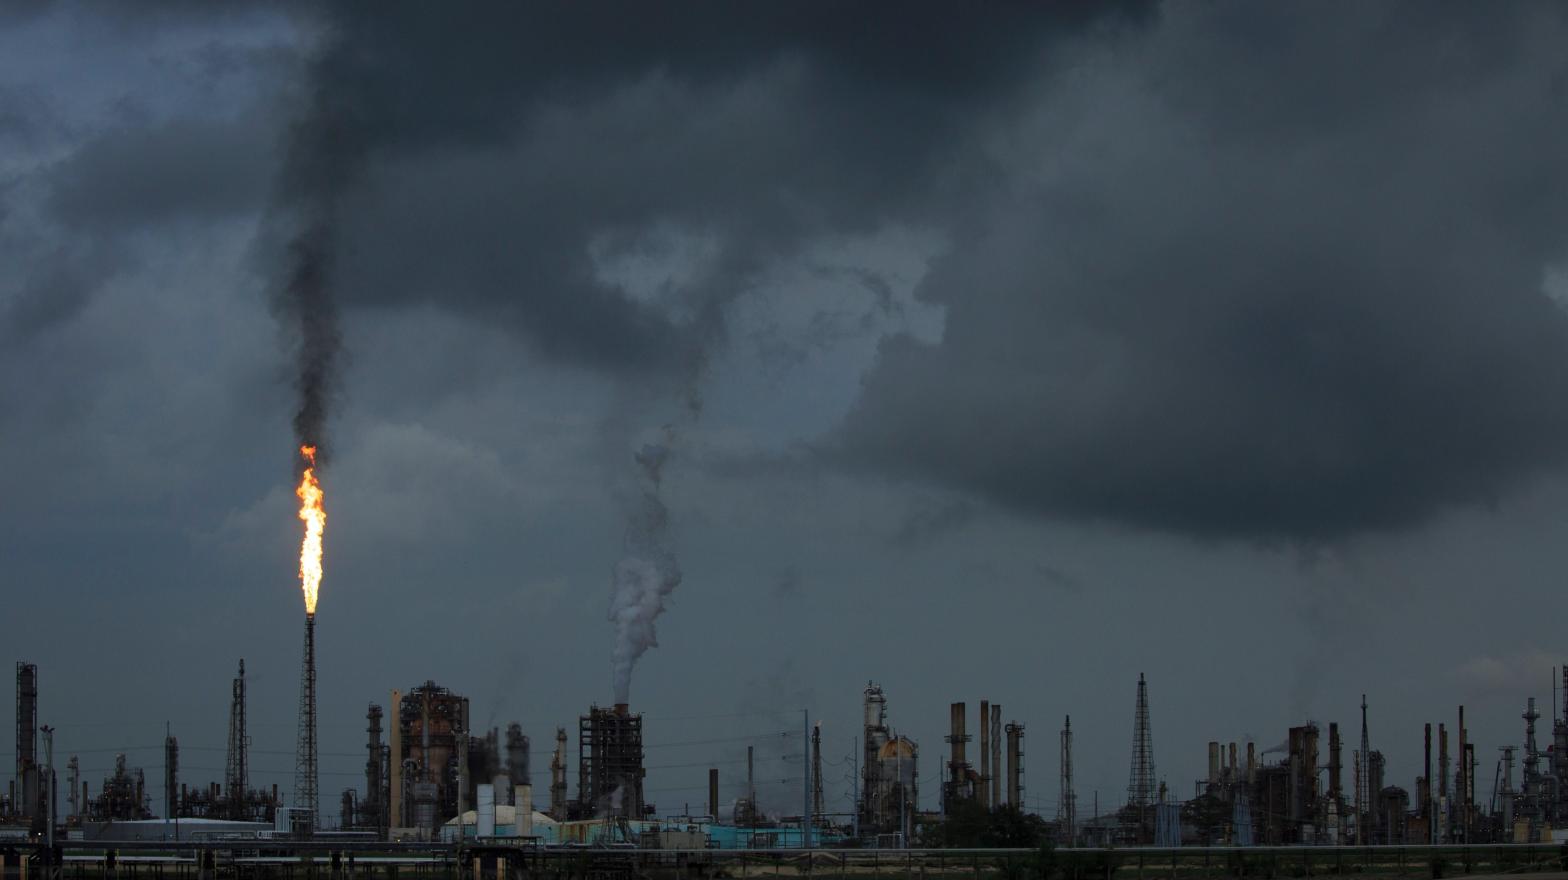 A gas flare at the Shell Chemical LP petroleum refinery in Norco, Louisiana. (Photo: Drew Angerer, Getty Images)